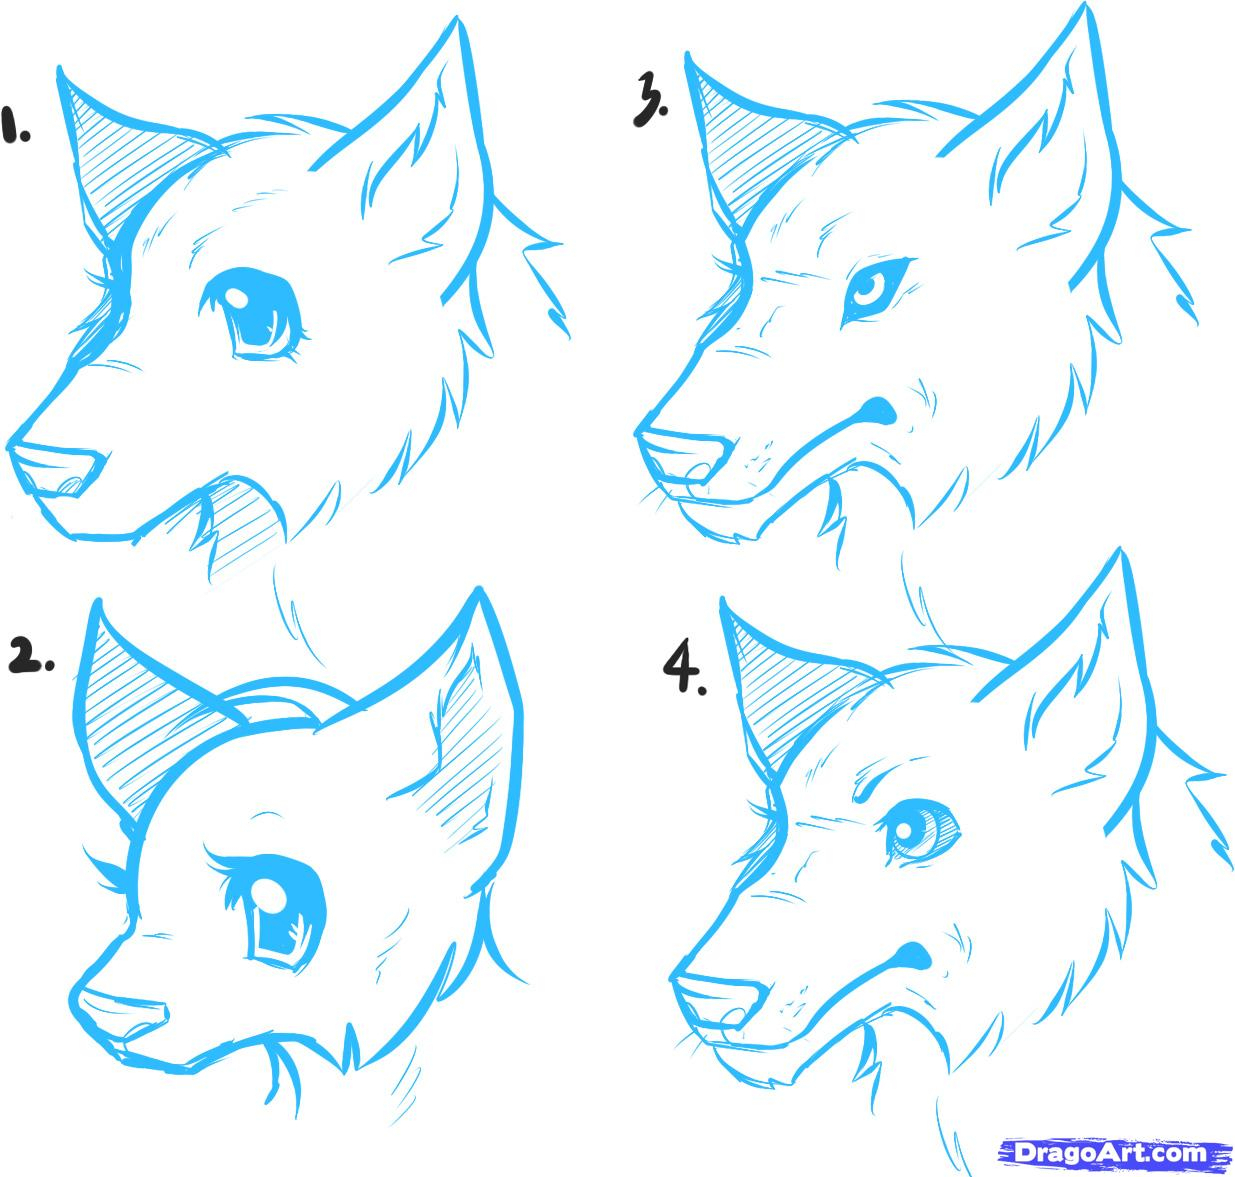 Easy To Draw Anime Wolfs / wolf running sketch Animal drawings, Wolf